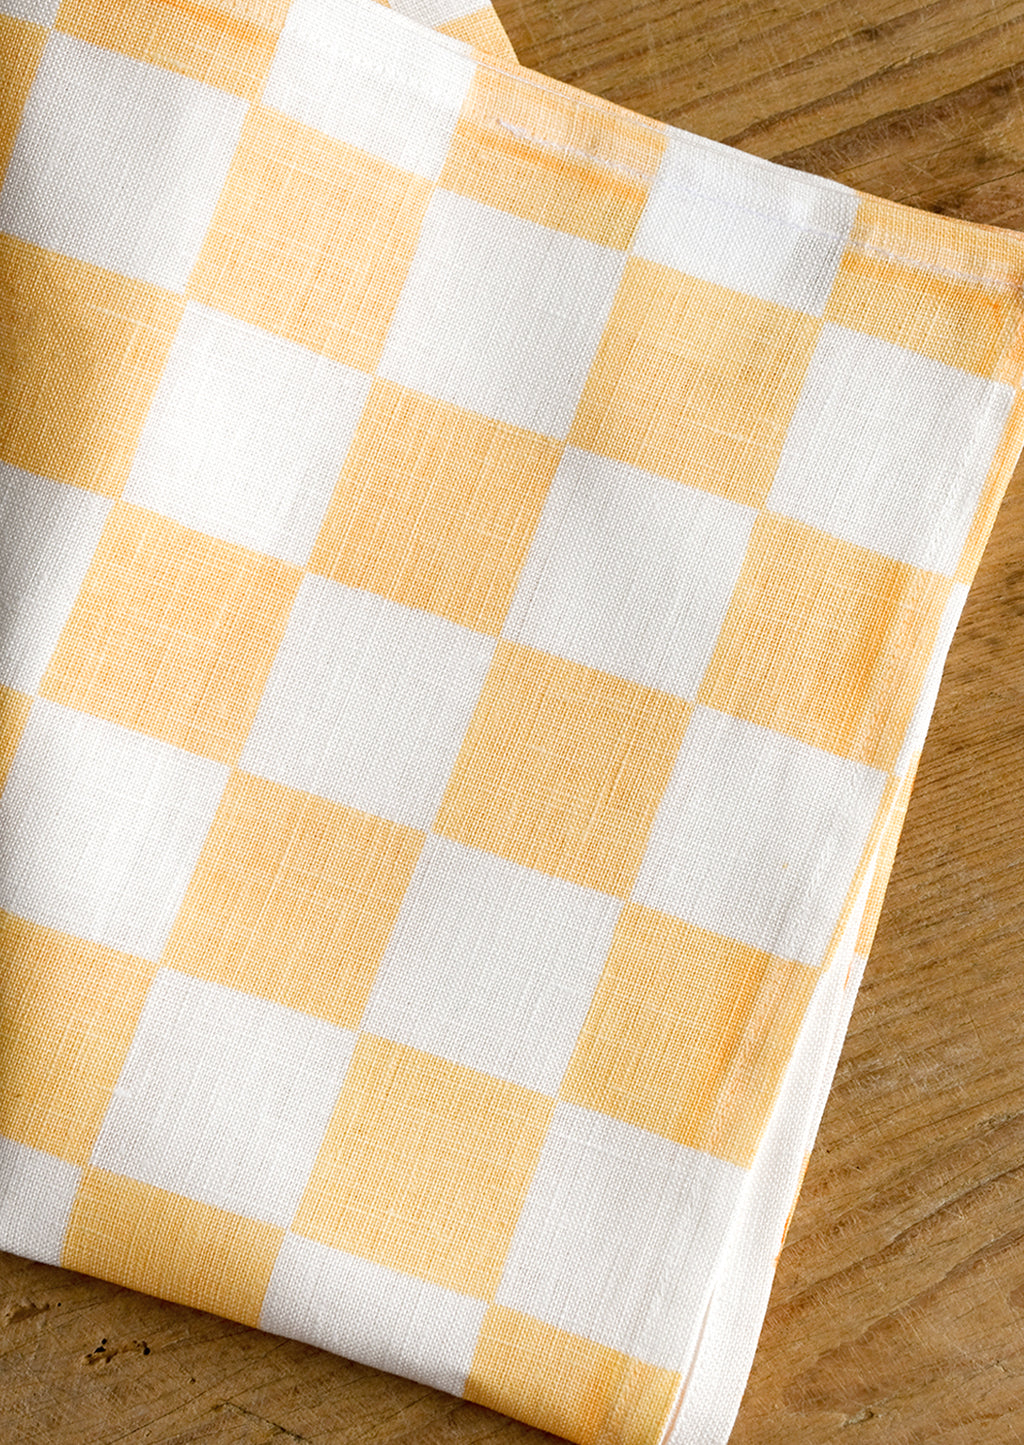 Apricot: A checkered linen tea towel in apricot and white.